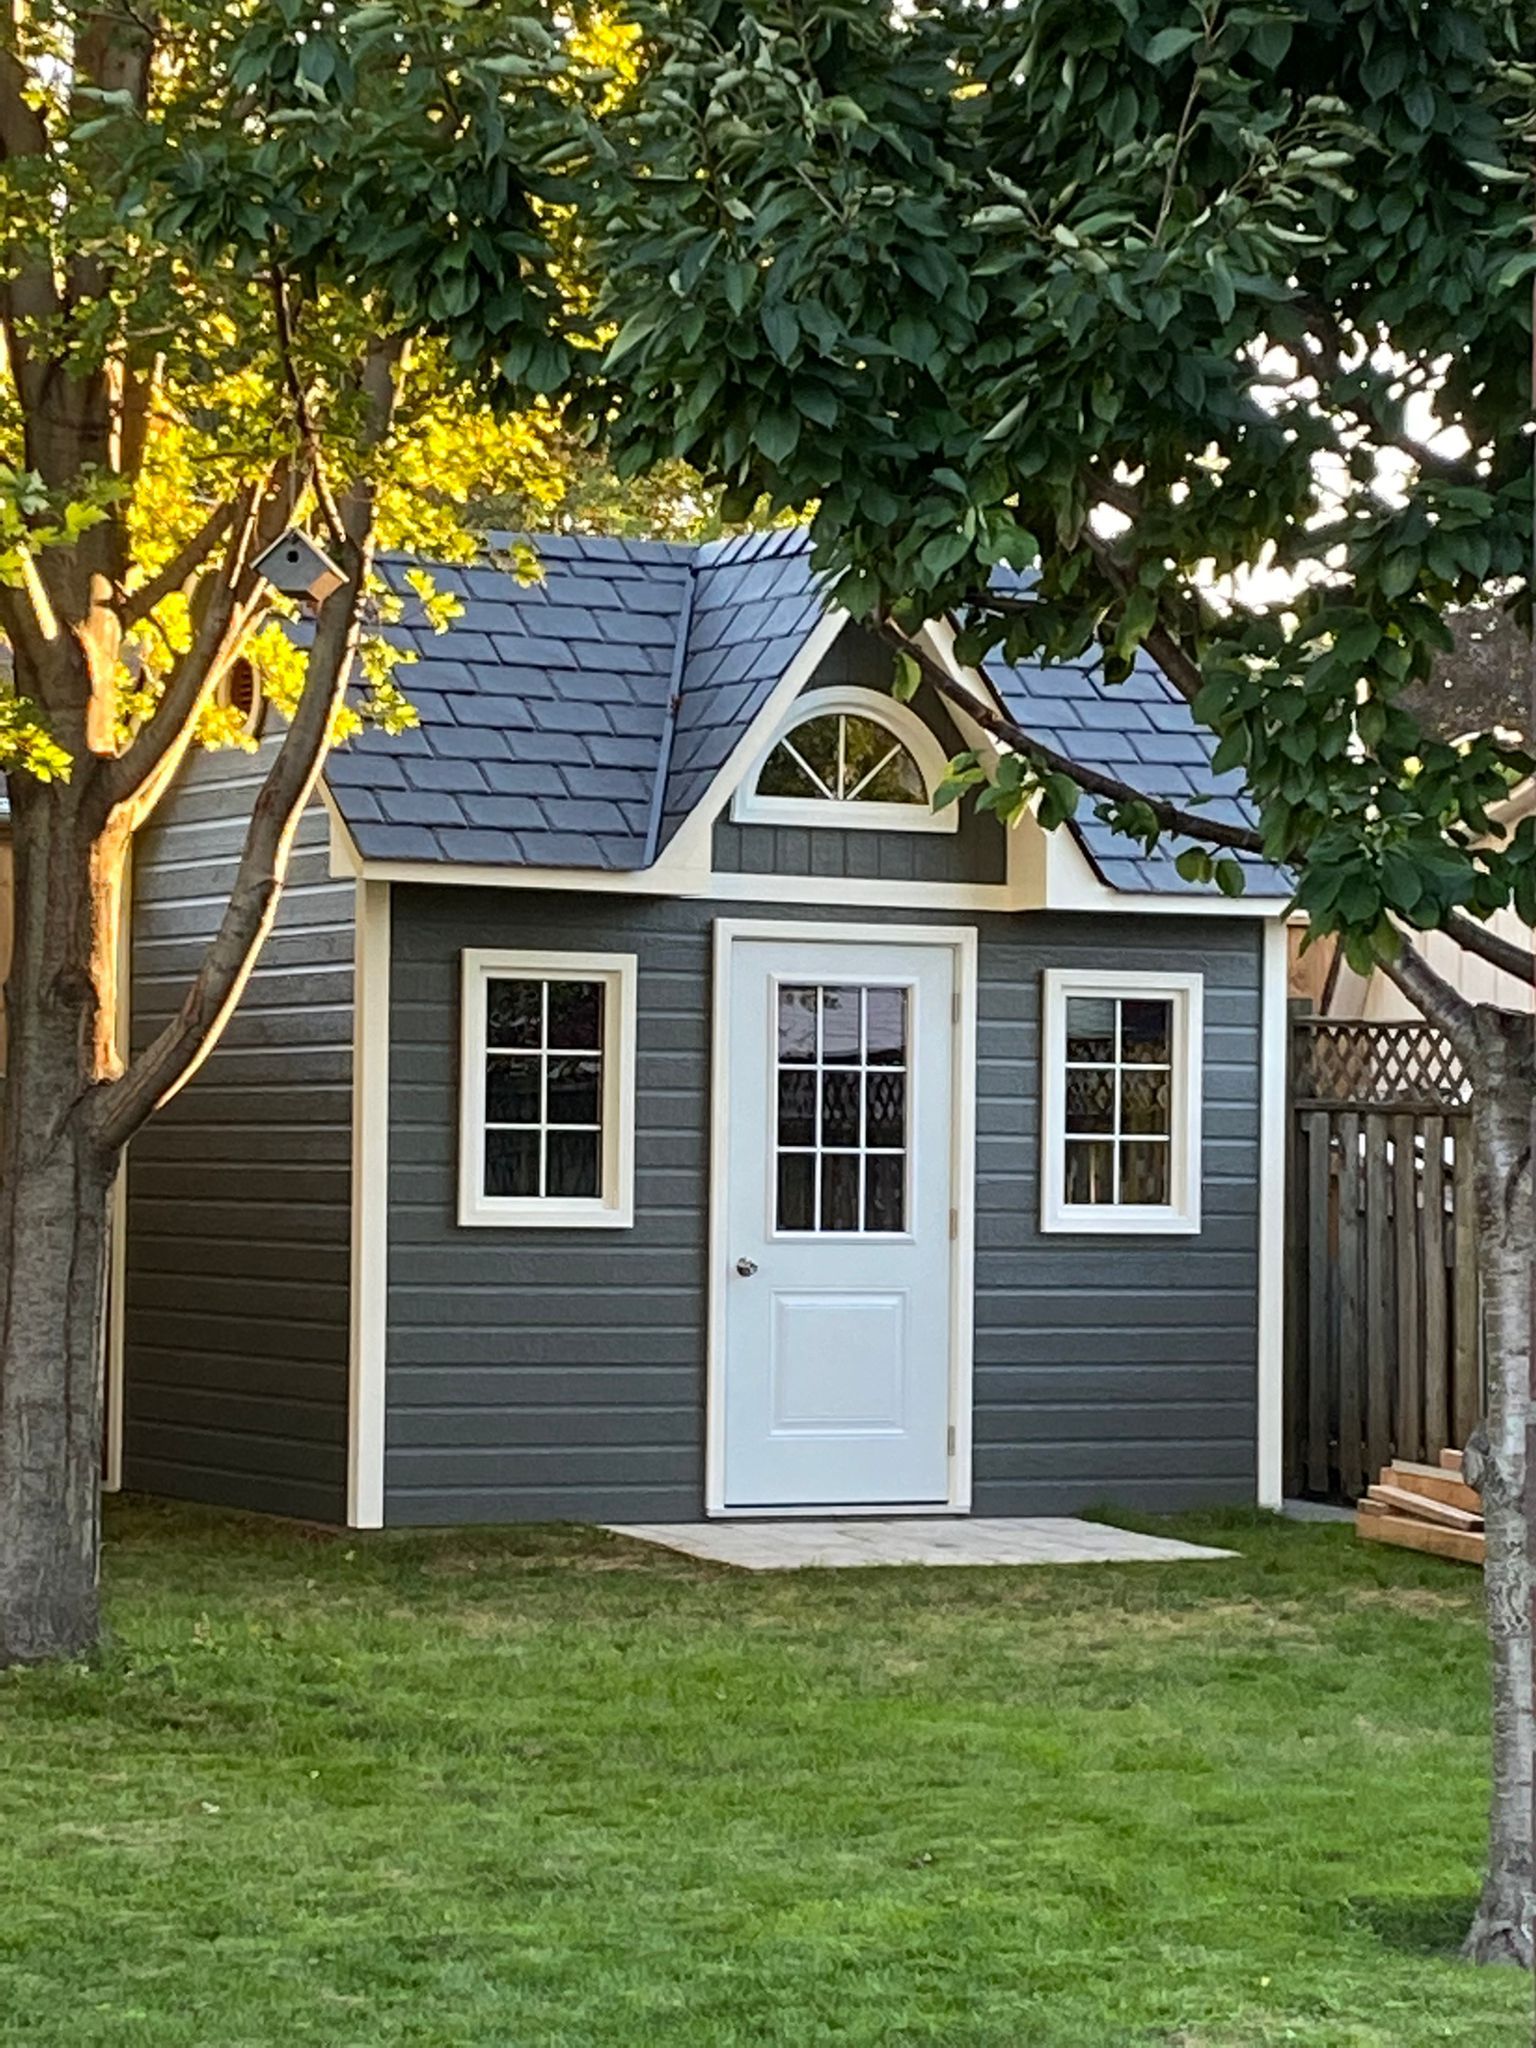 Front view of 8’ x 12' Copper Creek Garden Shed located in Grimsby, Ontario – Summerwood Product